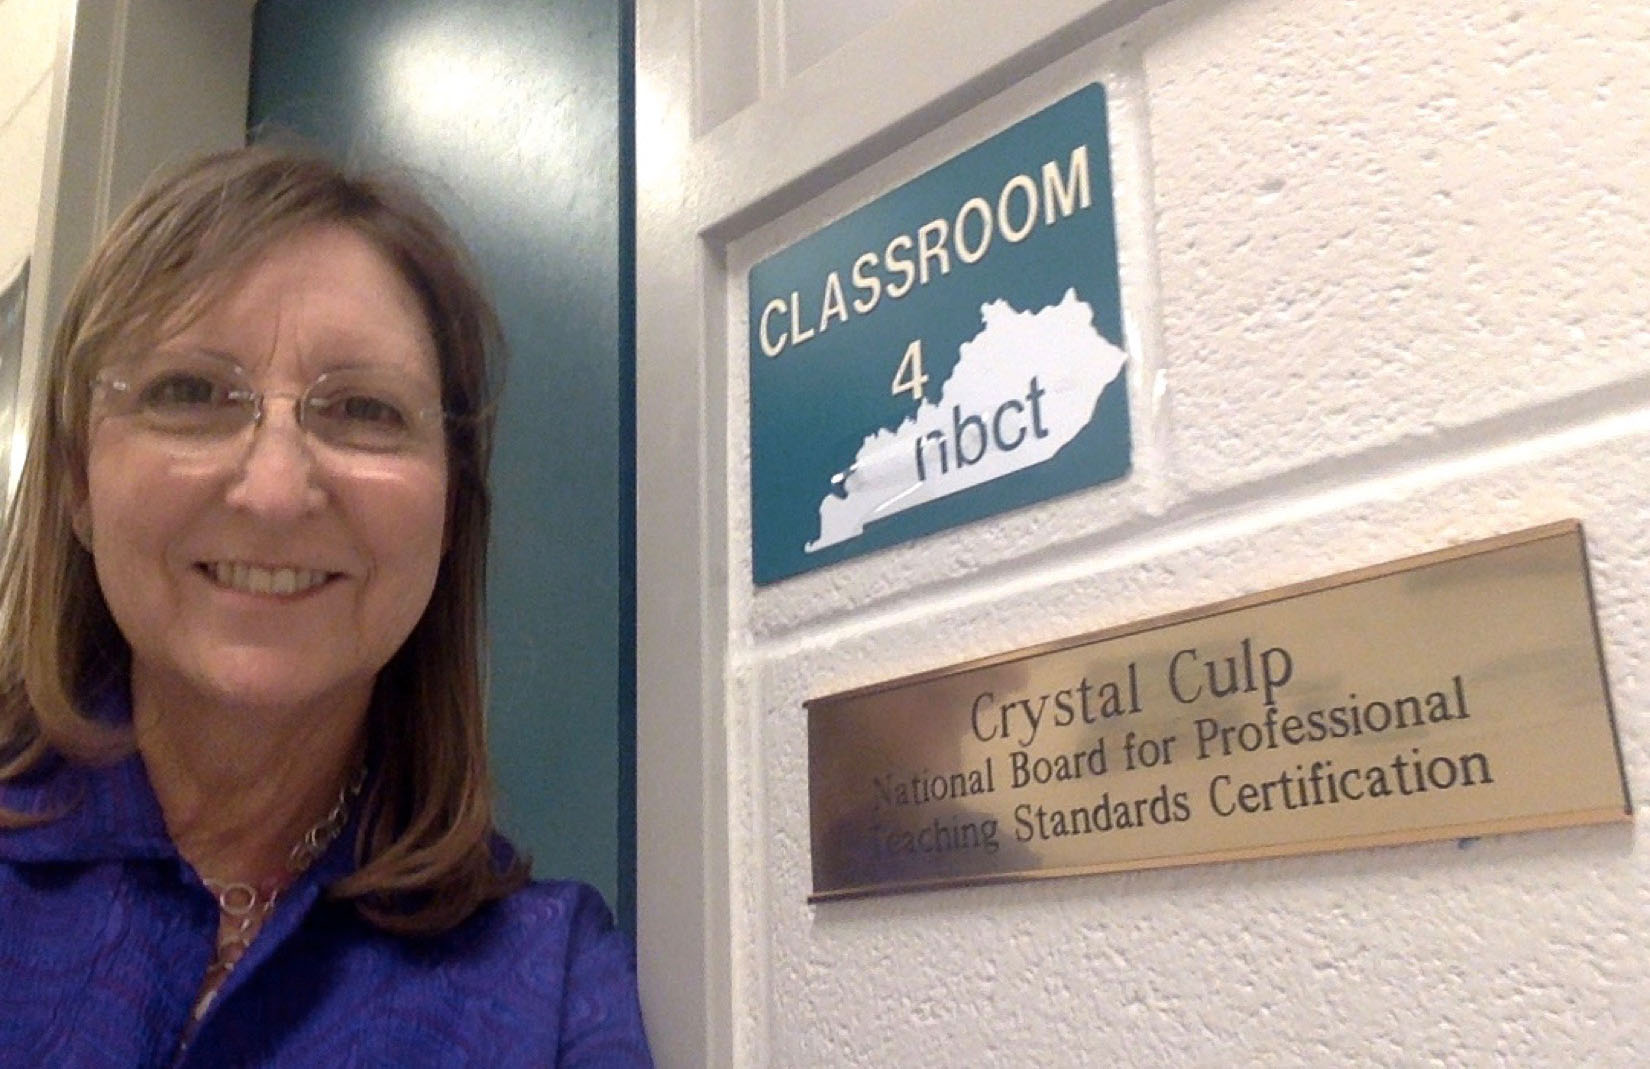 A woman smiling next to two plaques on a wall that read: " Classroom 4 NBCT" and "Crystal Culp National Board for Professional Teaching Standards Certification"